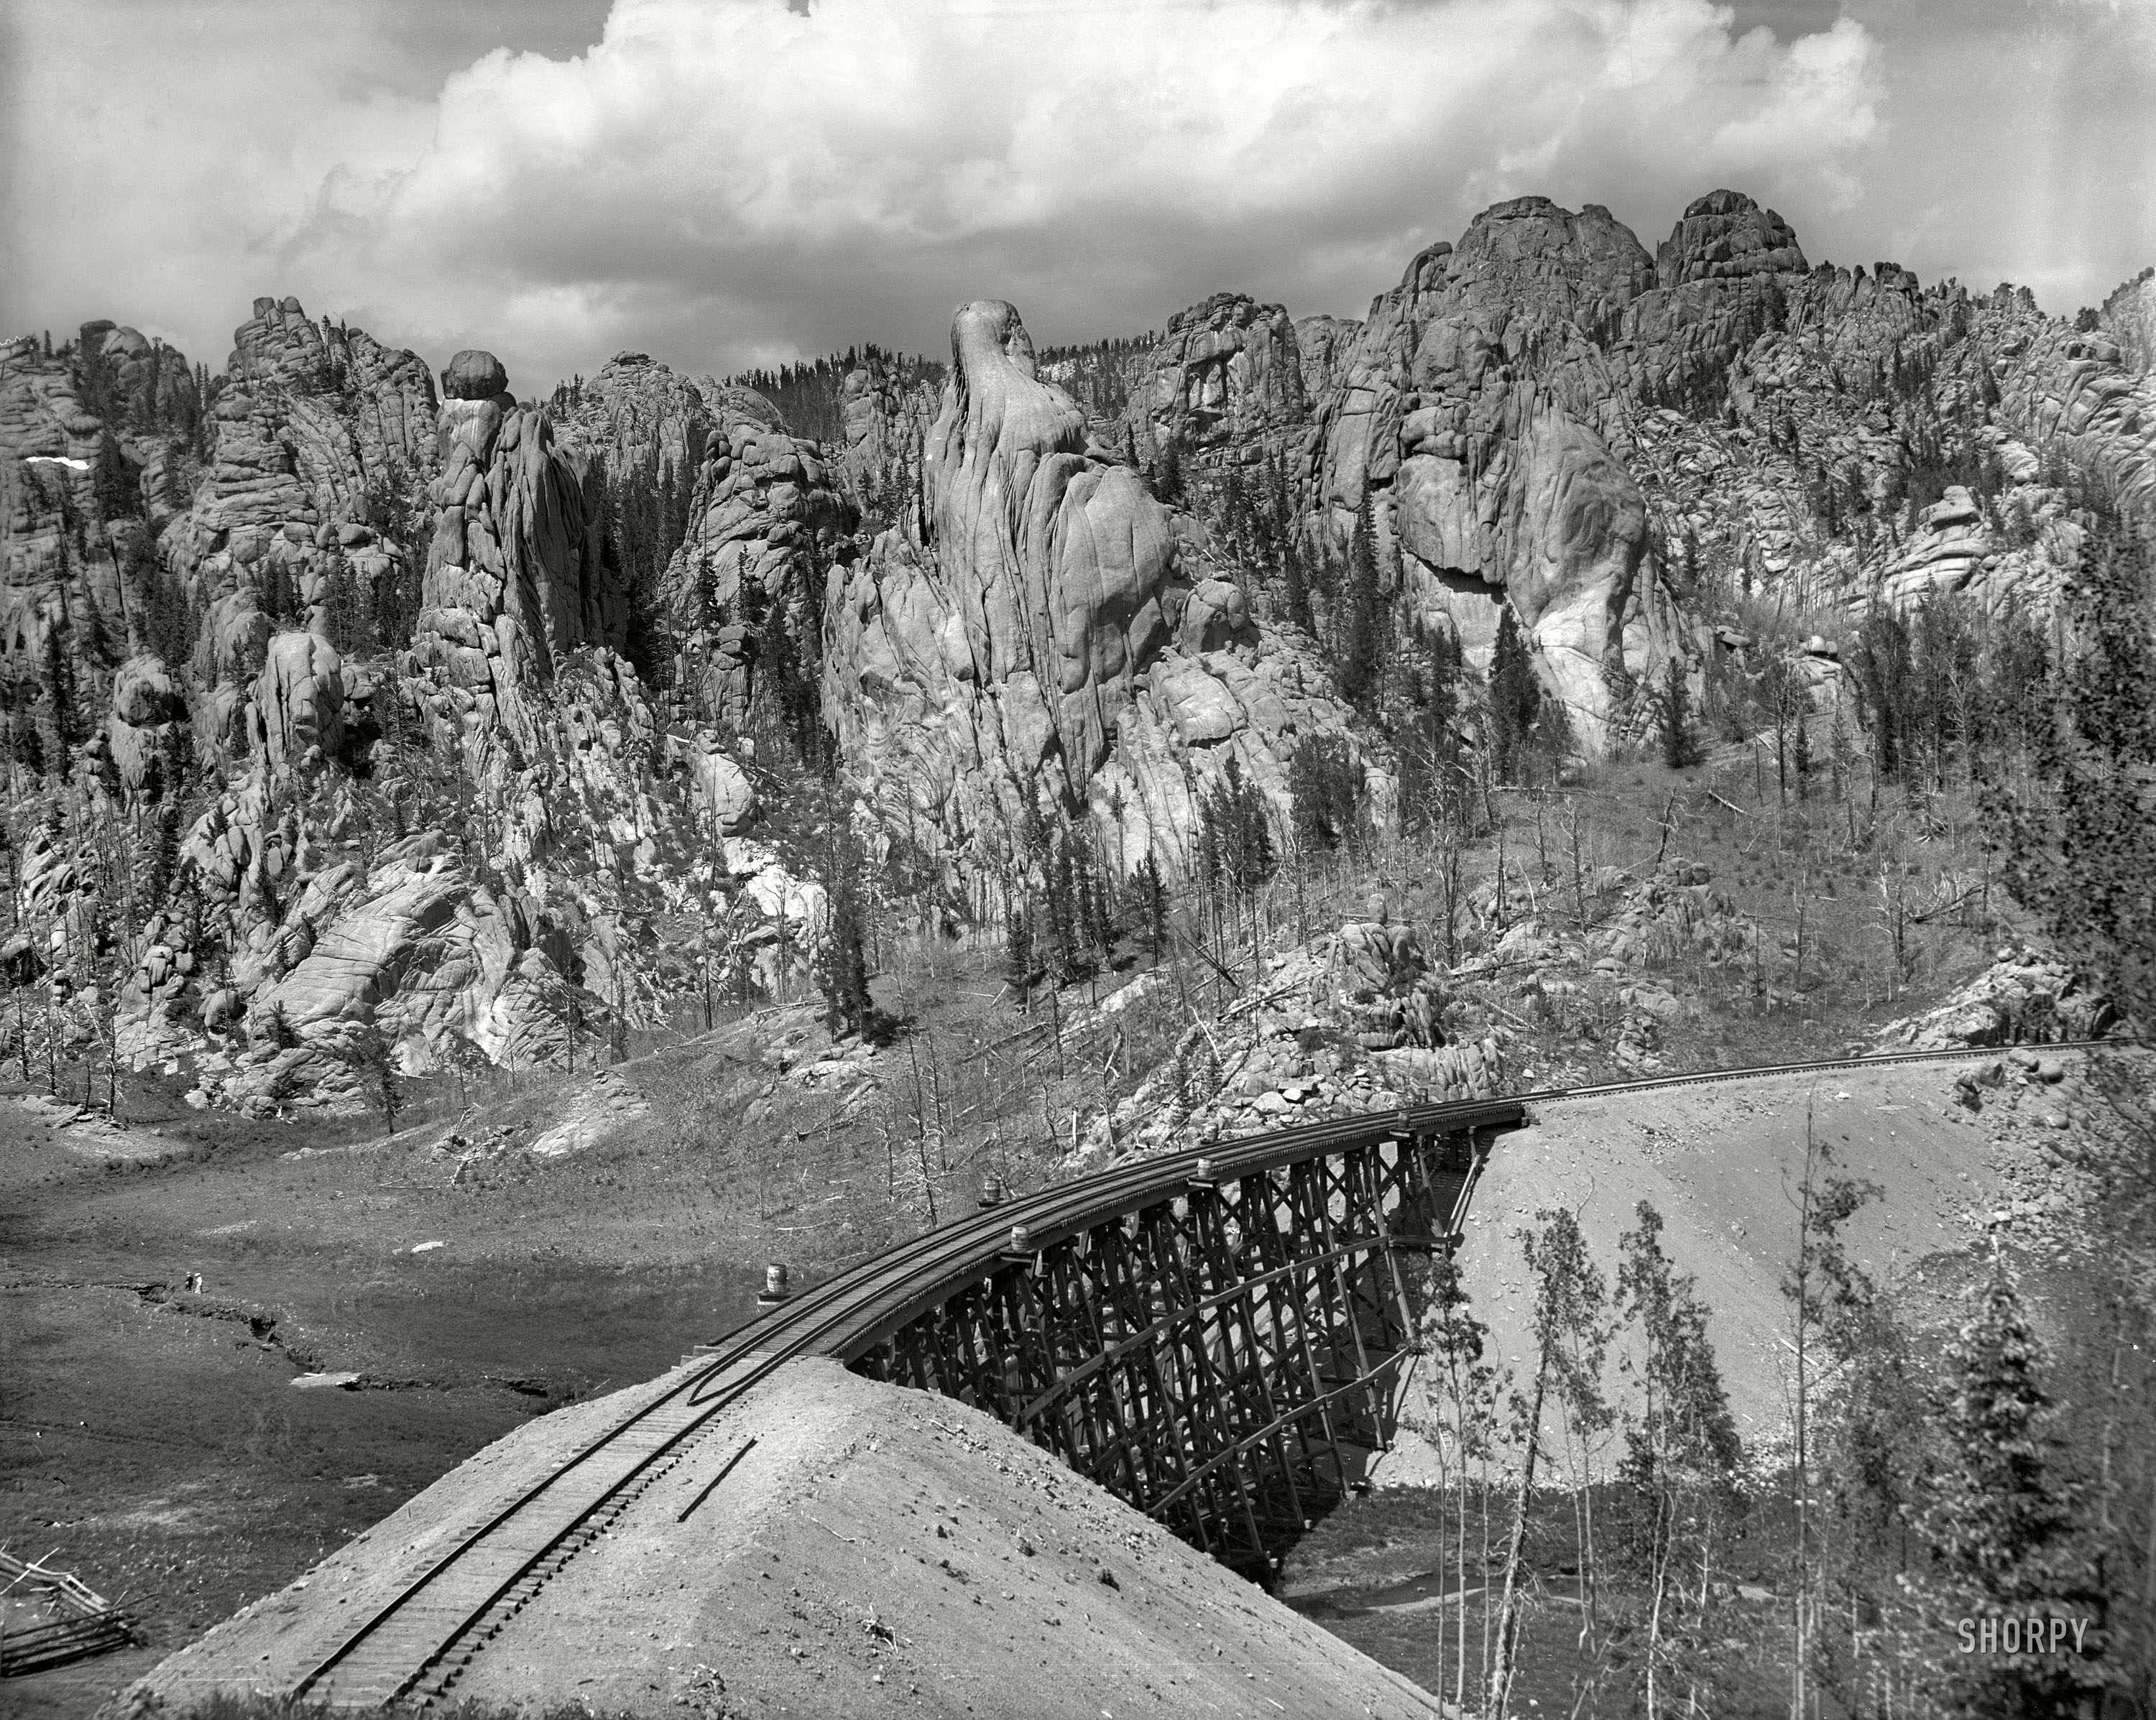 Colorado circa 1901. "Cathedral Park near Clyde. Colorado Springs & Cripple Creek Short Line." A gray day in the Rockies. 8x10 inch glass transparency by William Henry Jackson, Detroit Publishing Company. View full size.